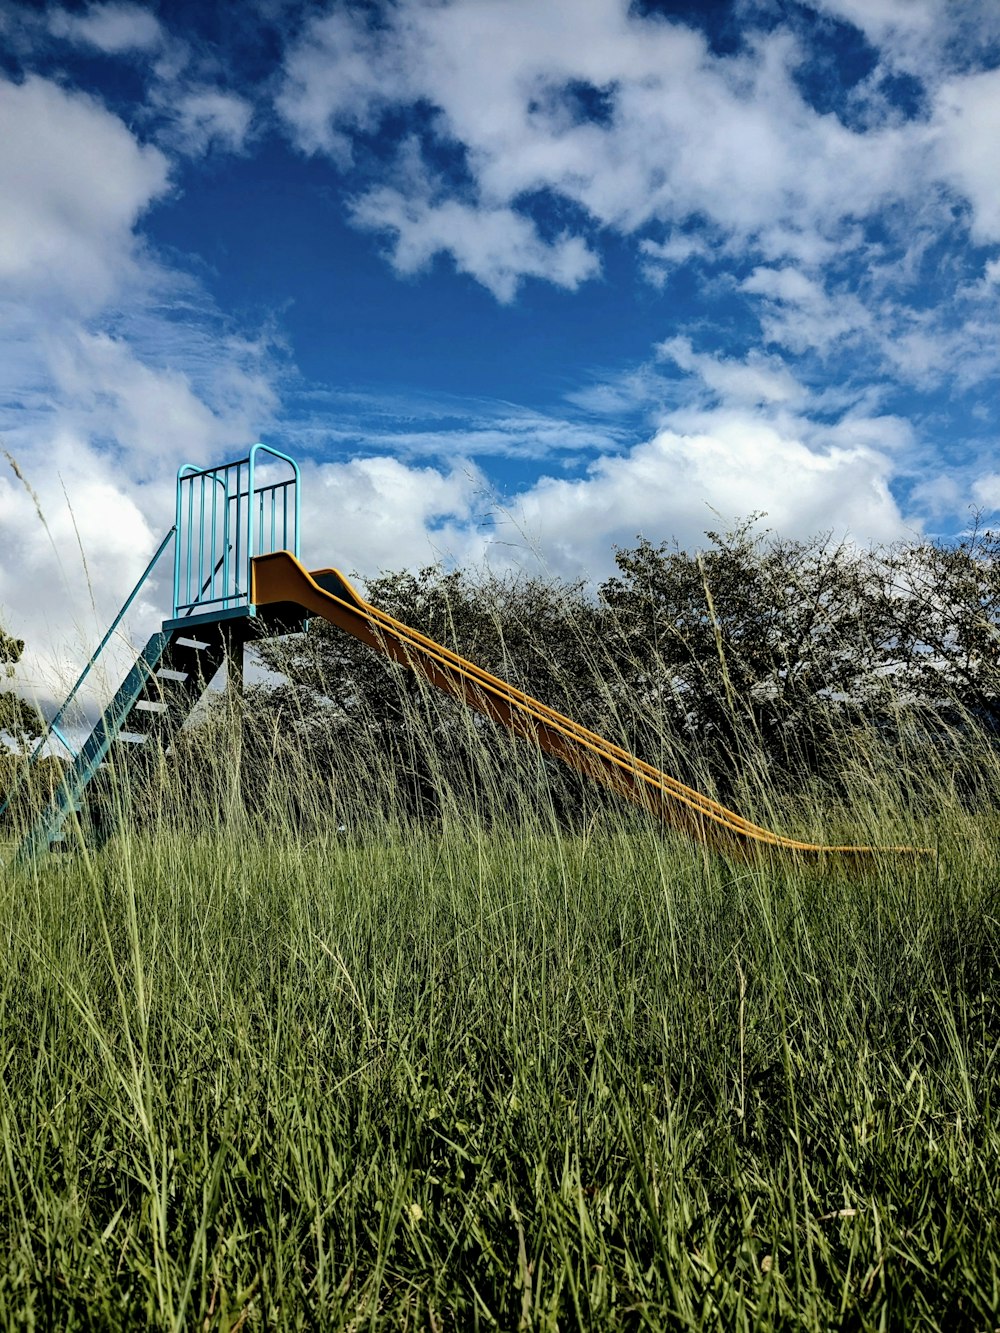 a slide in the middle of a grassy field